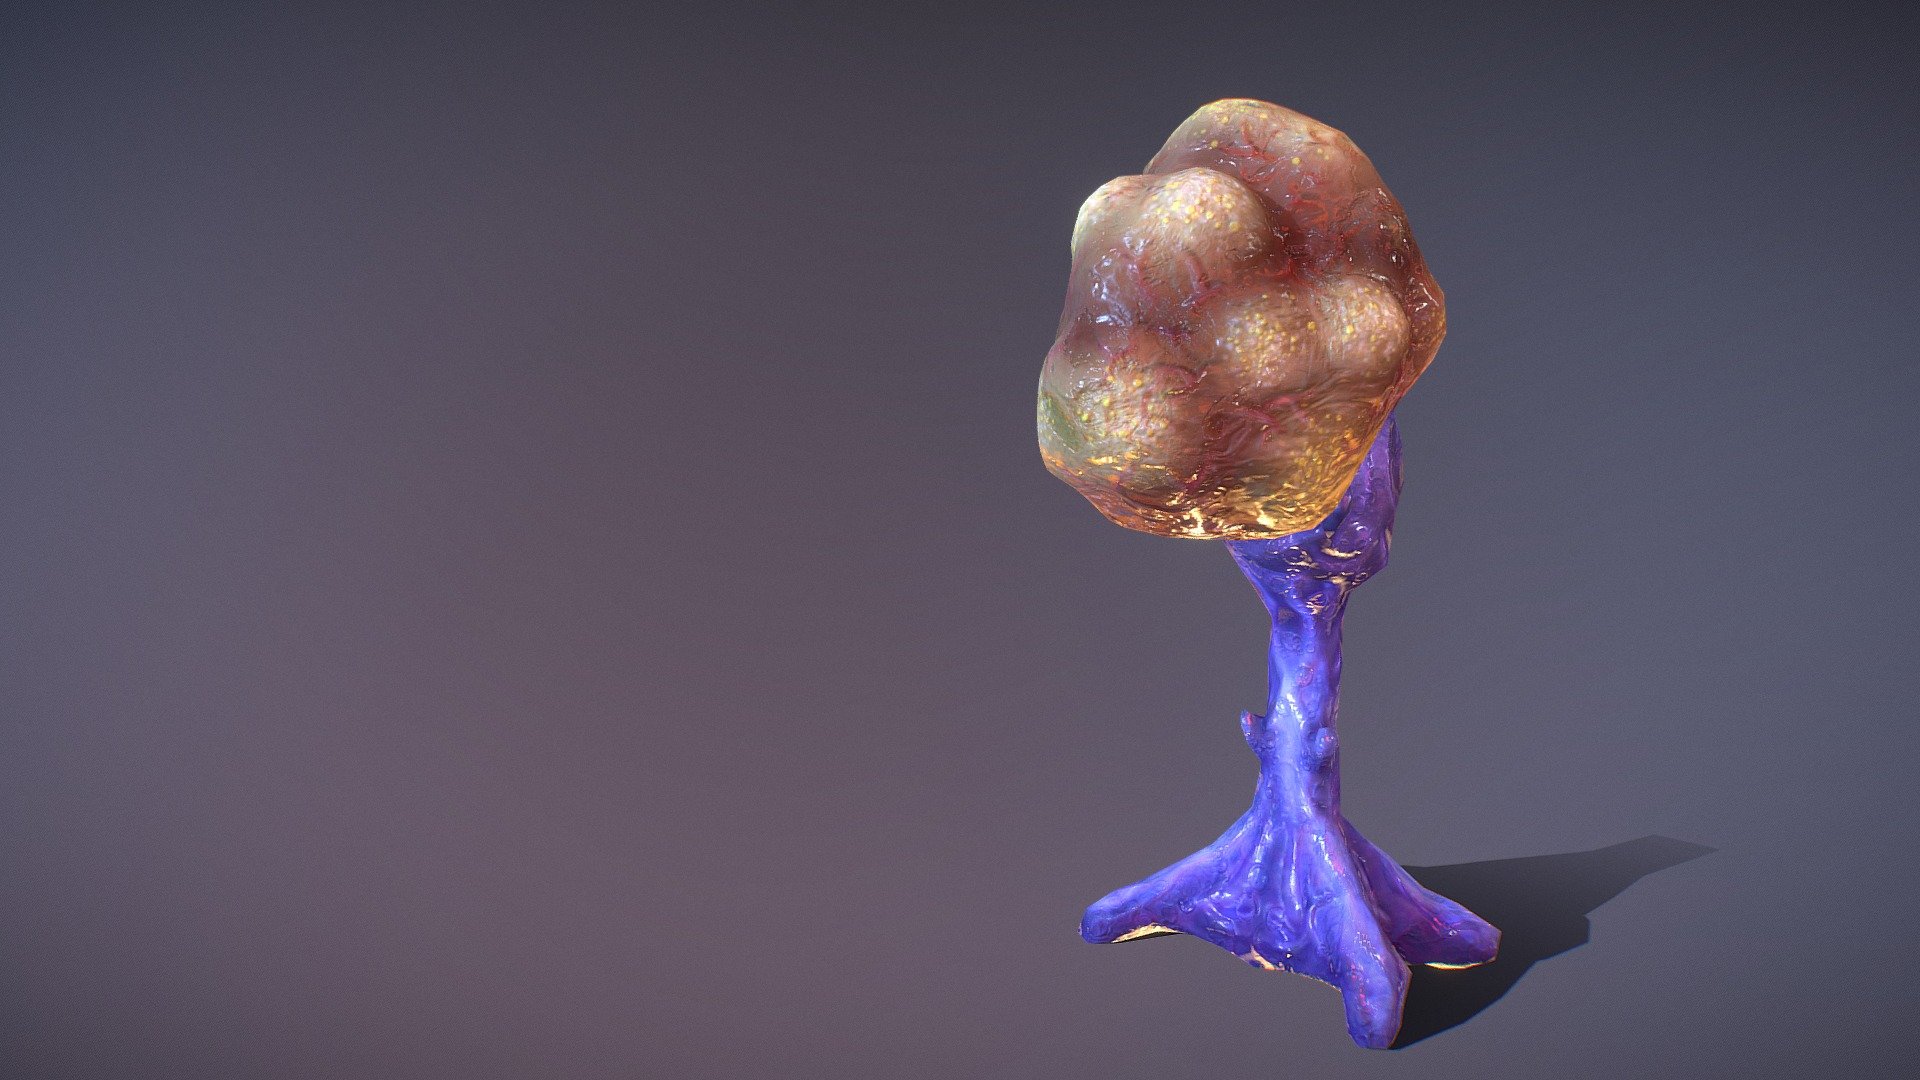 A gross, alien egg sack, filled with veins and all manners of alien goop, probably.

CONTACT for other model formats if neccesary 3d model